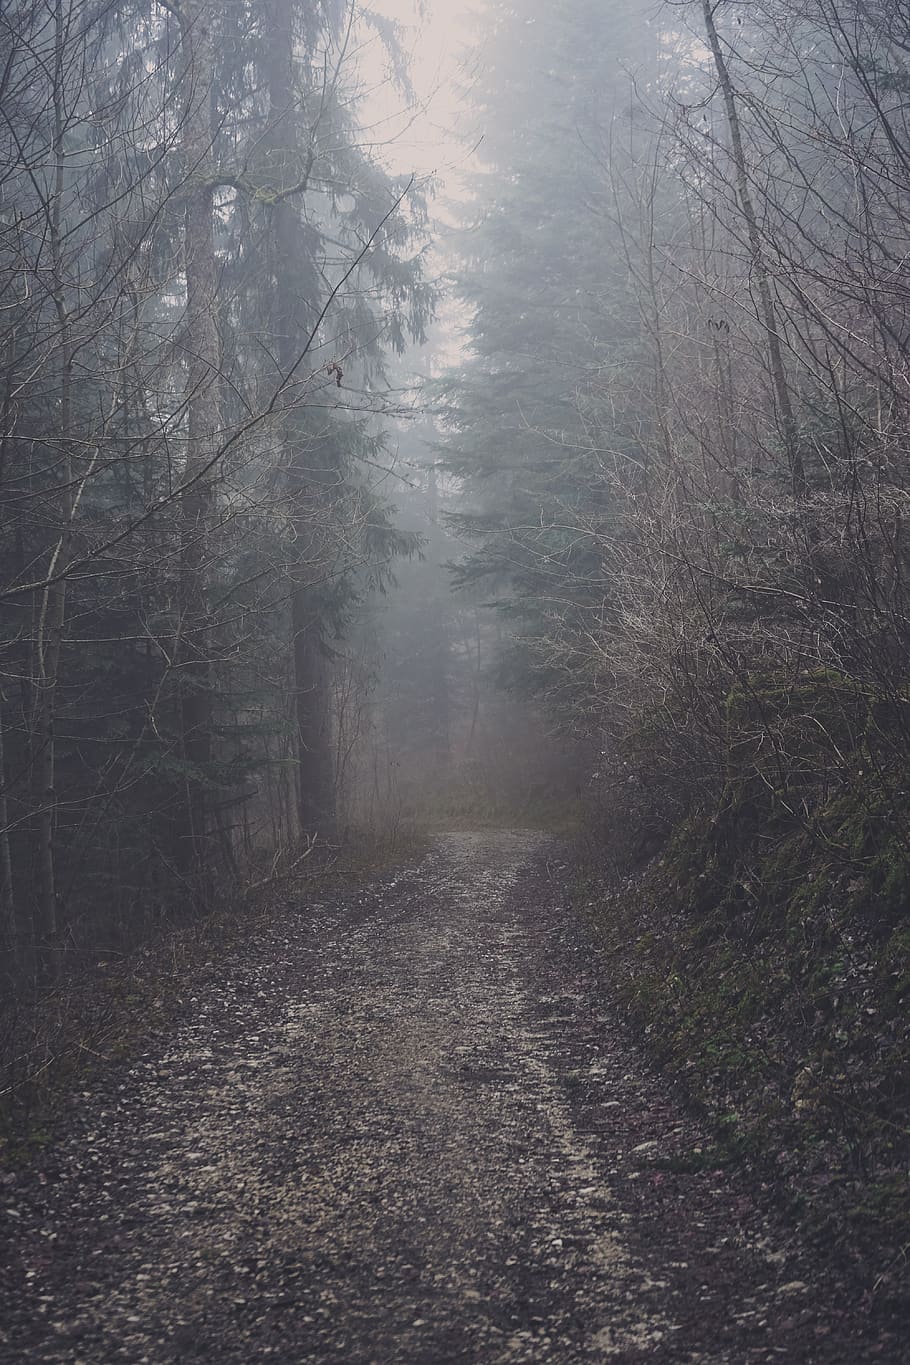 grey fog covering dirt trail in the middle of woods, weather